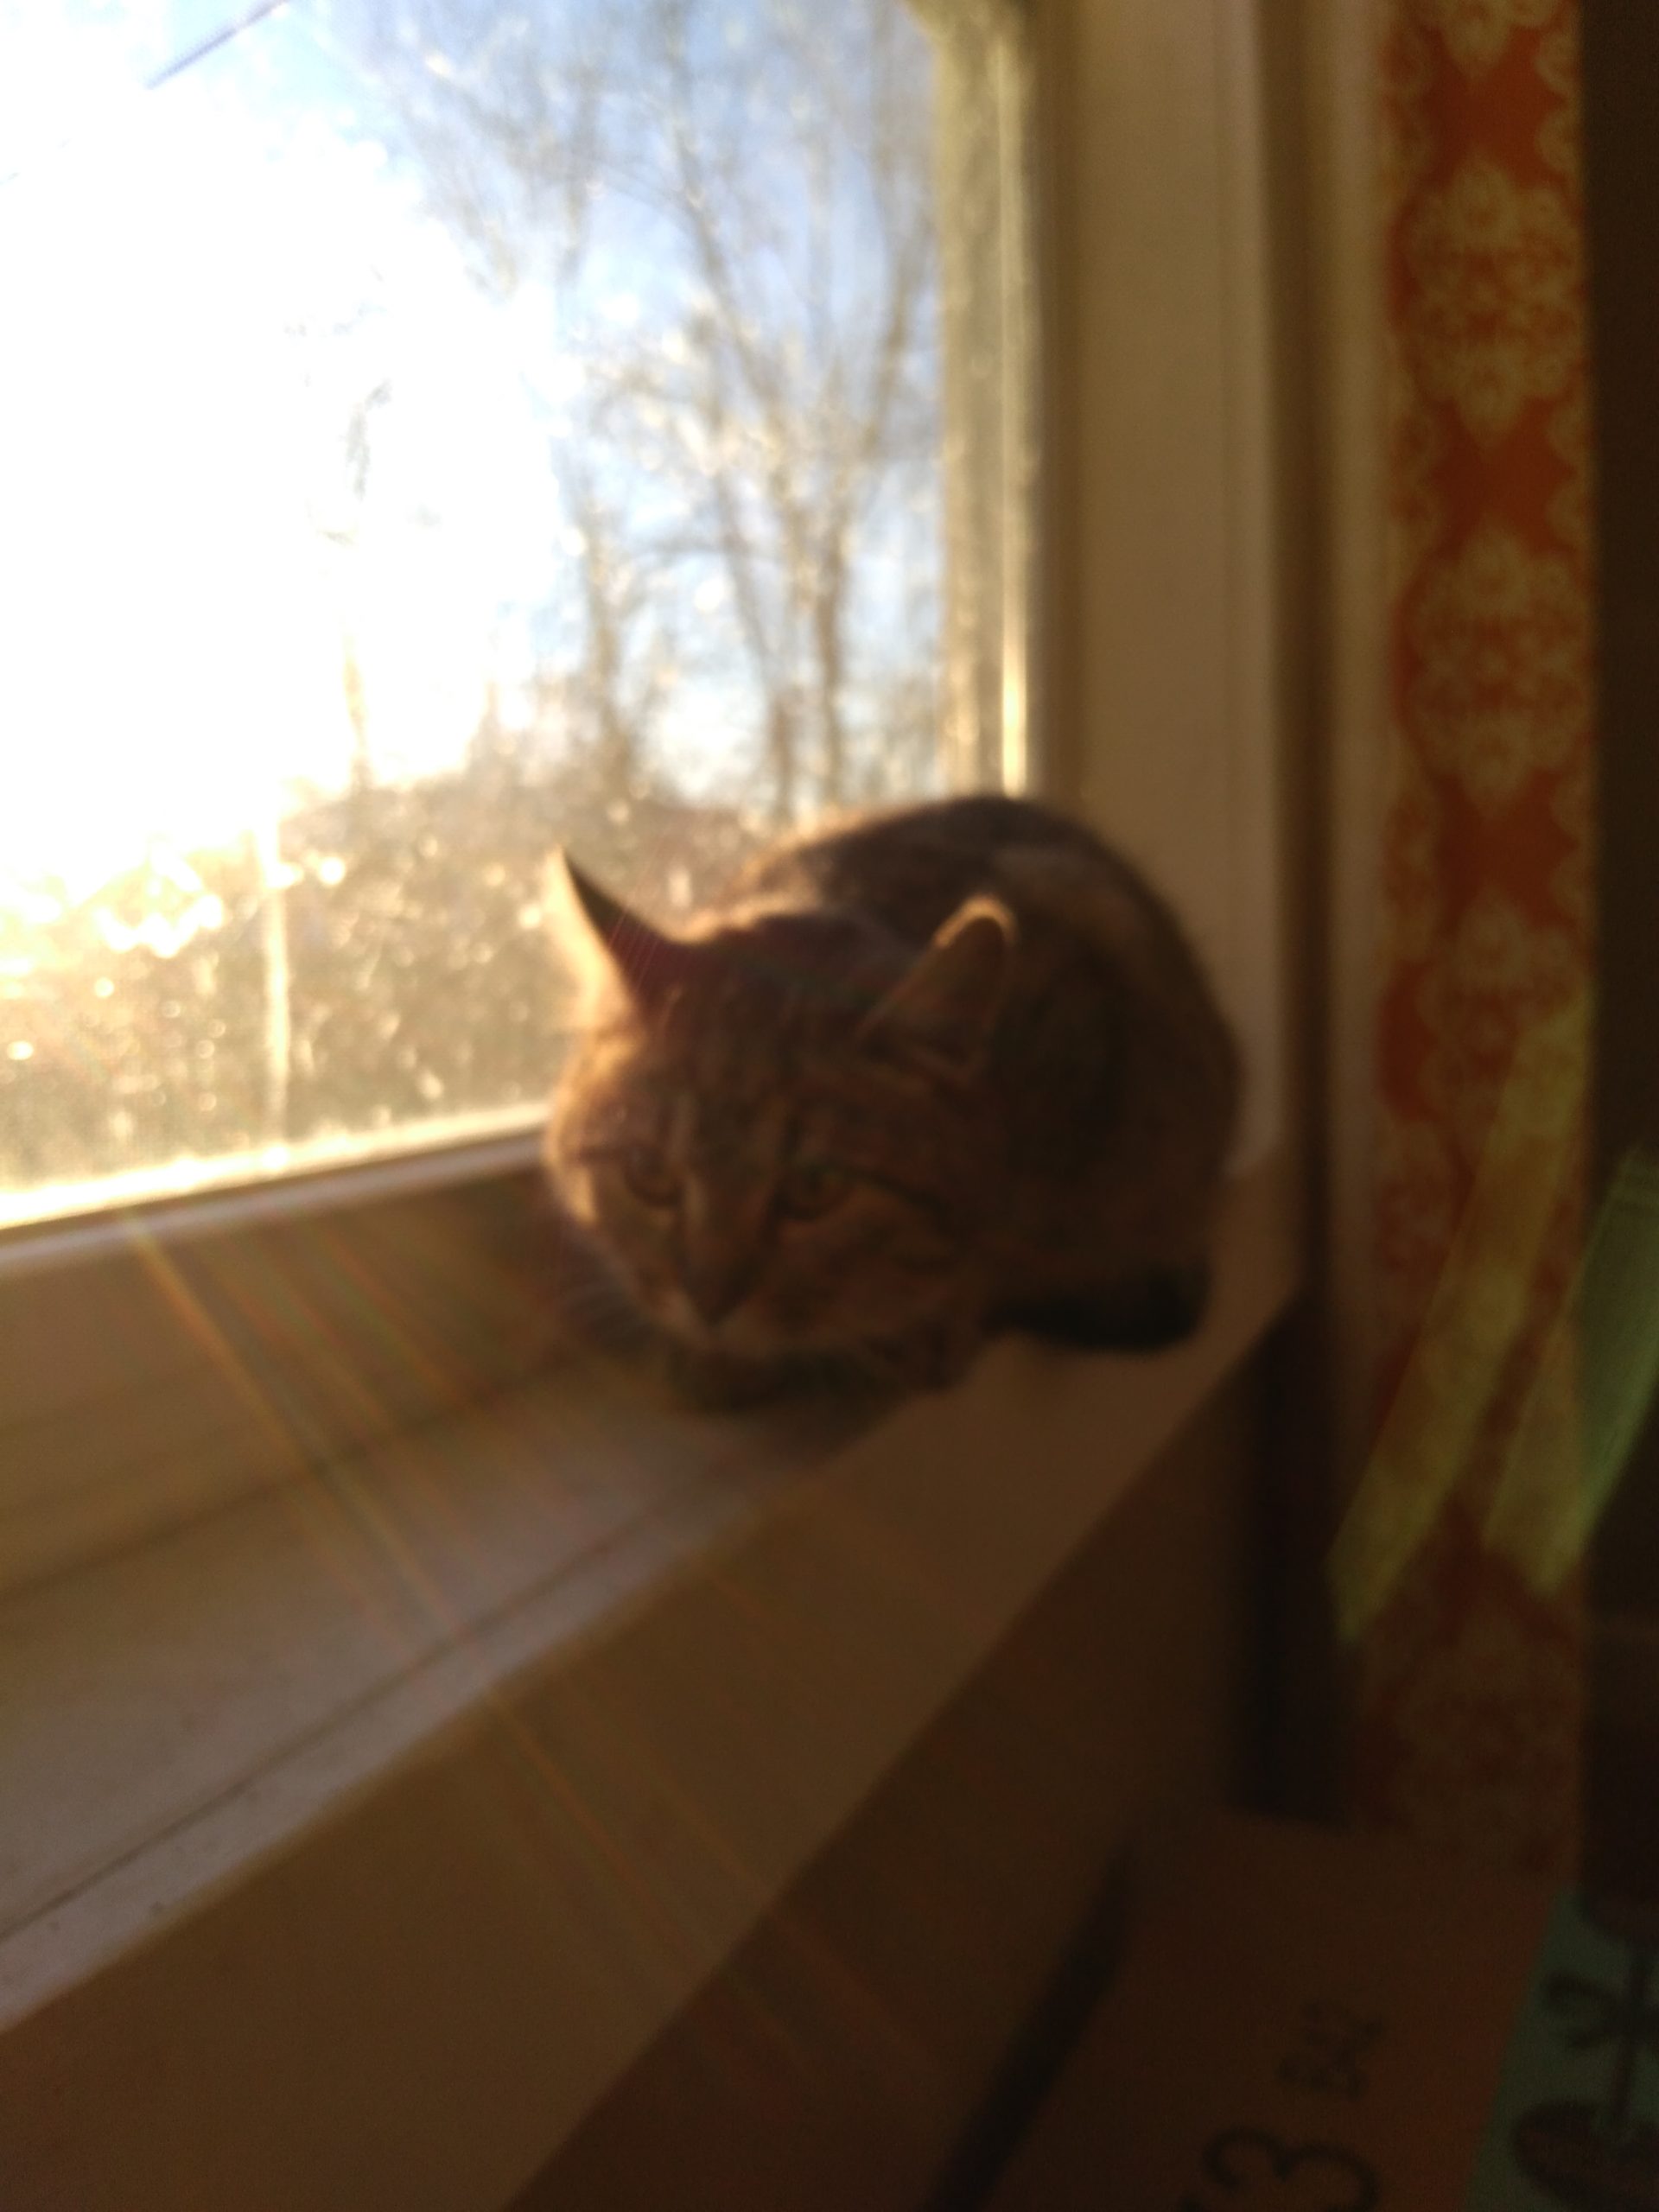 Spot sitting on a window ledge as sun shines in from outside